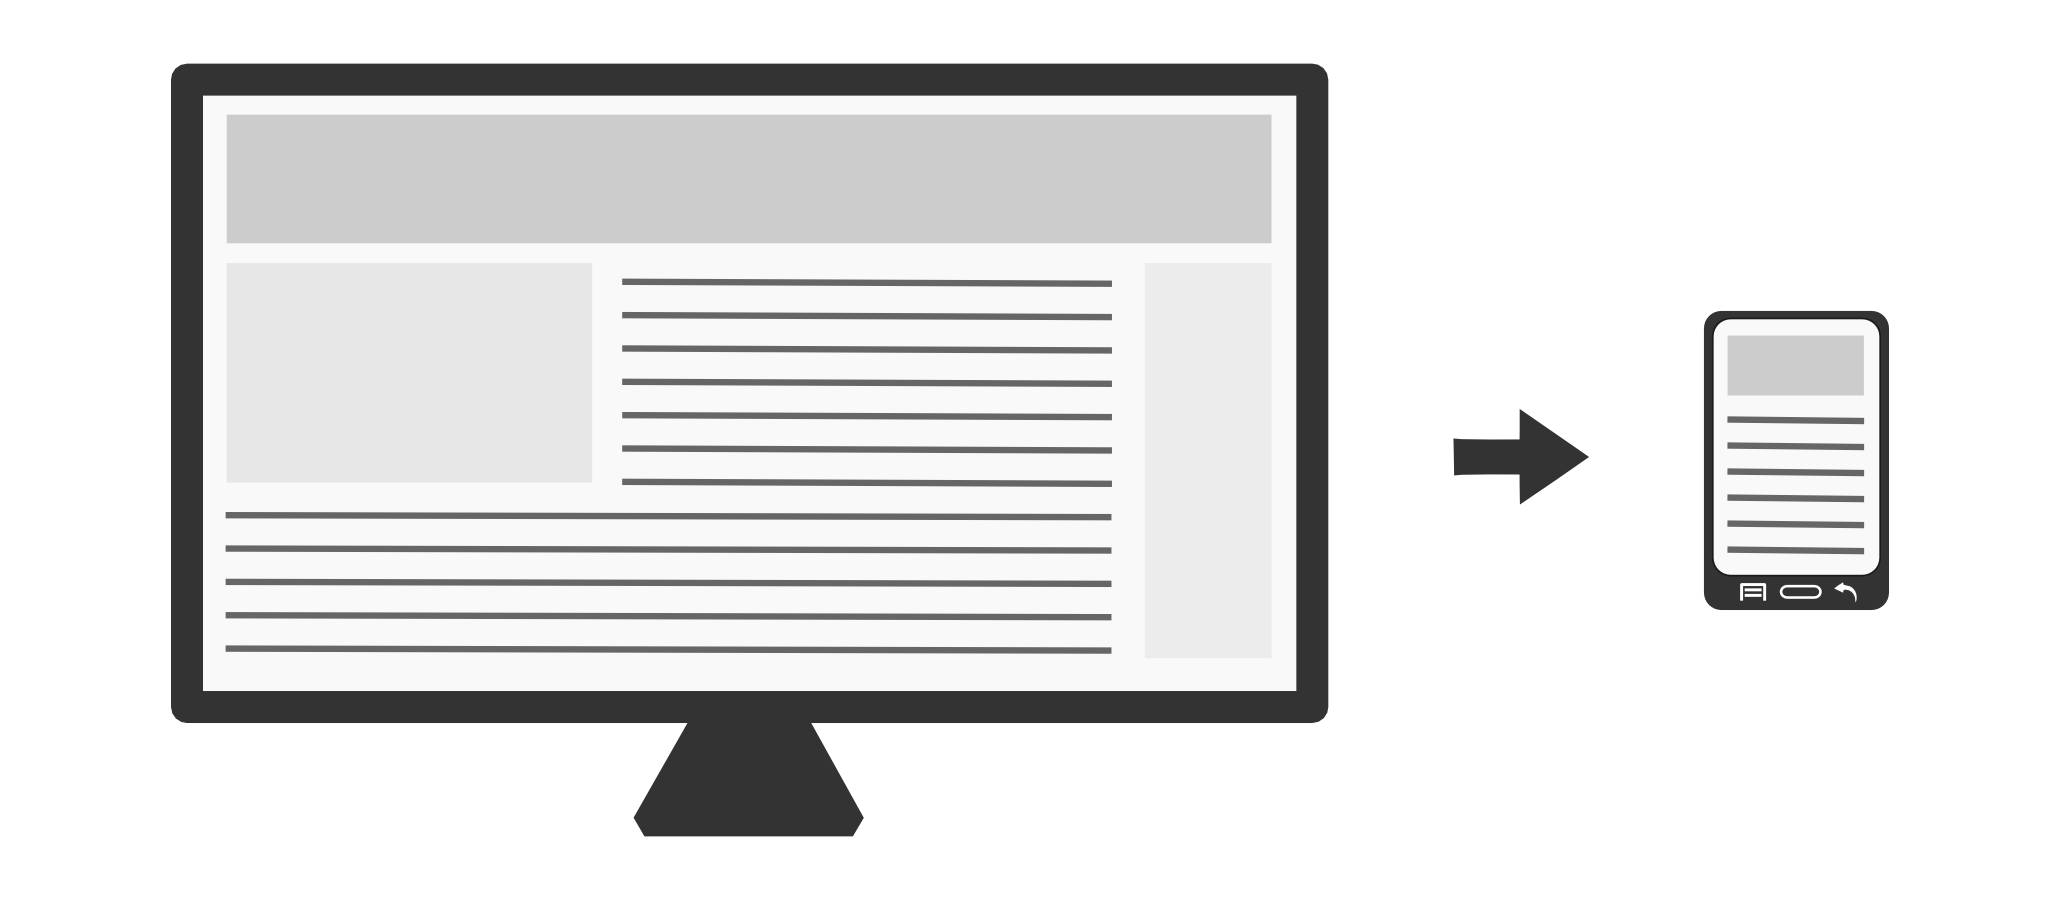 Desktop monitor displaying a website with an arrow pointing to a phone showing the same website scaled down.